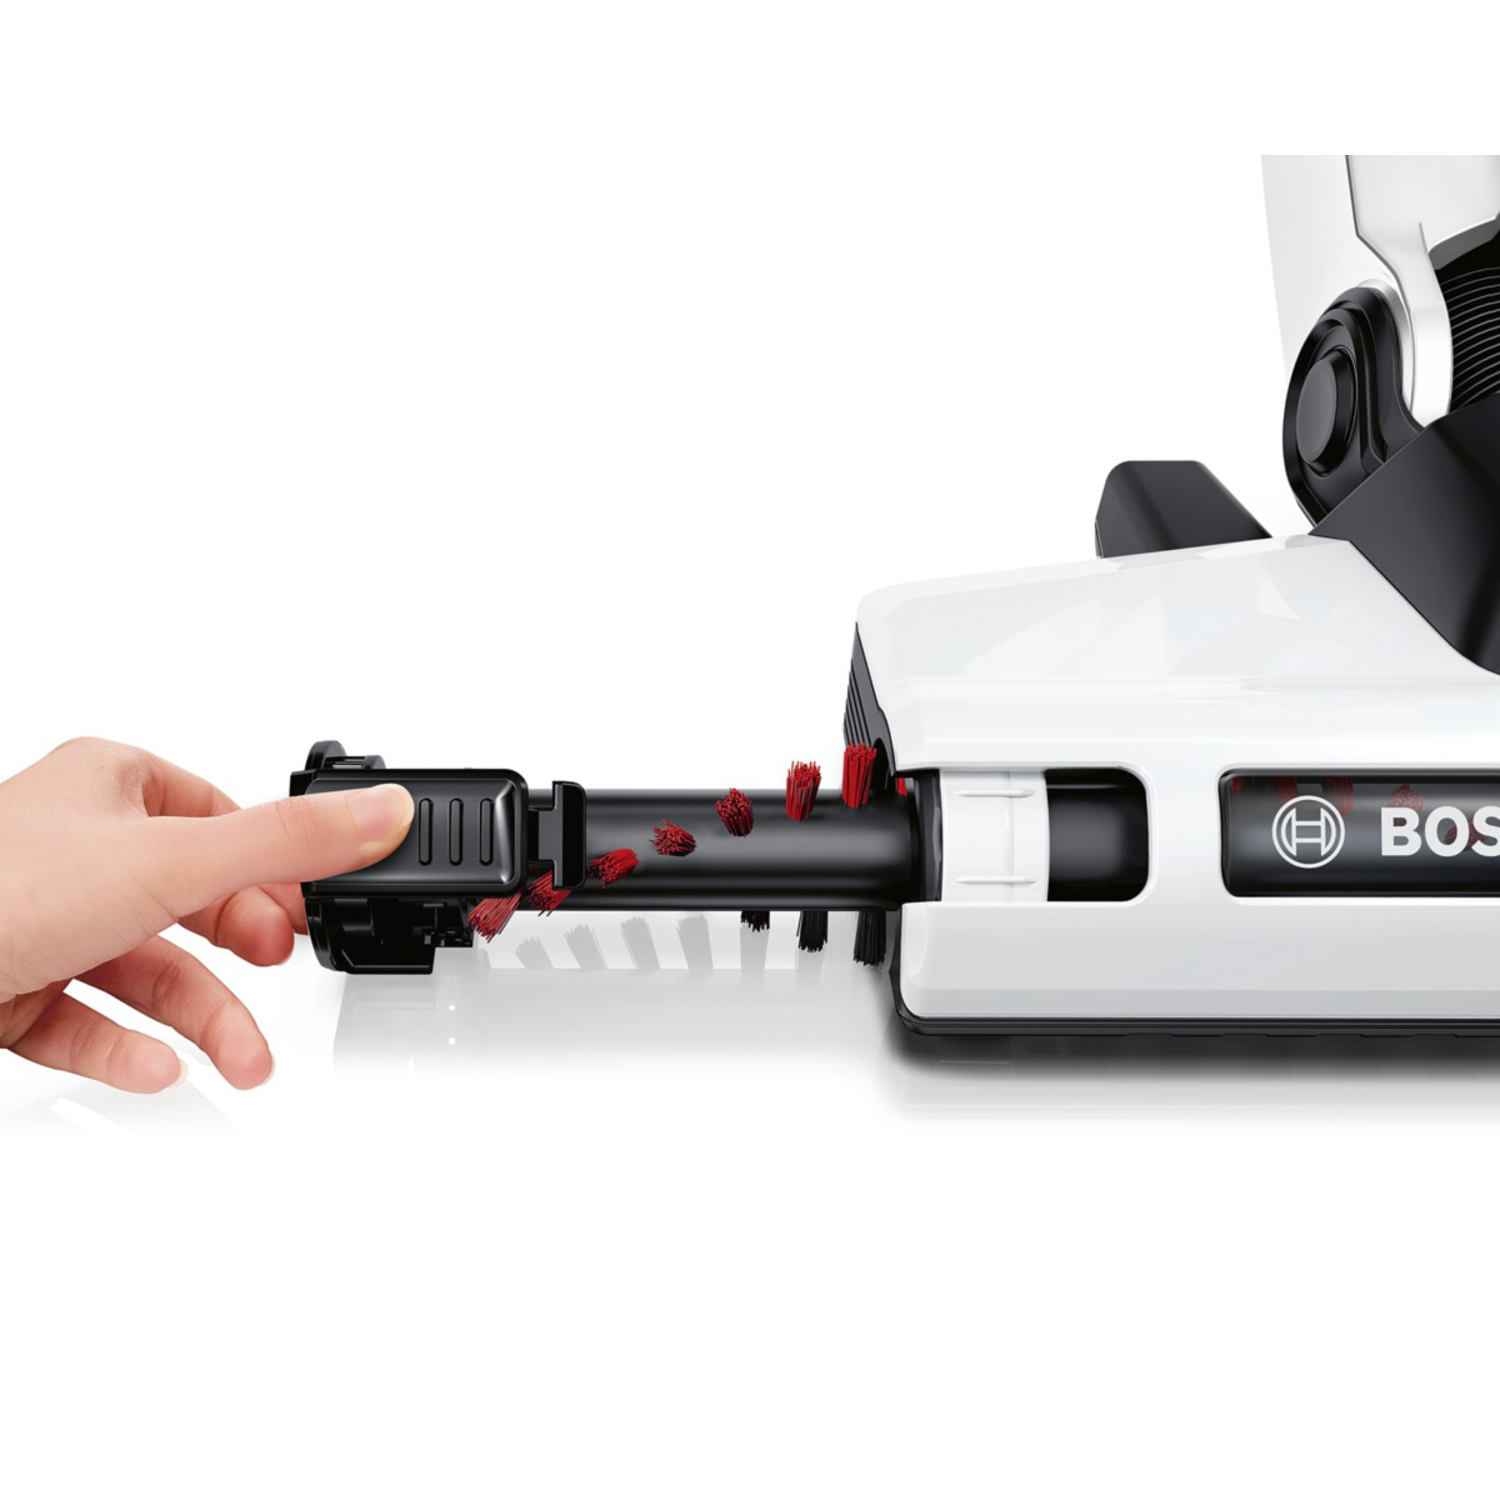 Bosch BCH6HYGGB Athlet ProHygienic Cordless Vacuum Cleaner - White - 60 Minute Run Time - 11